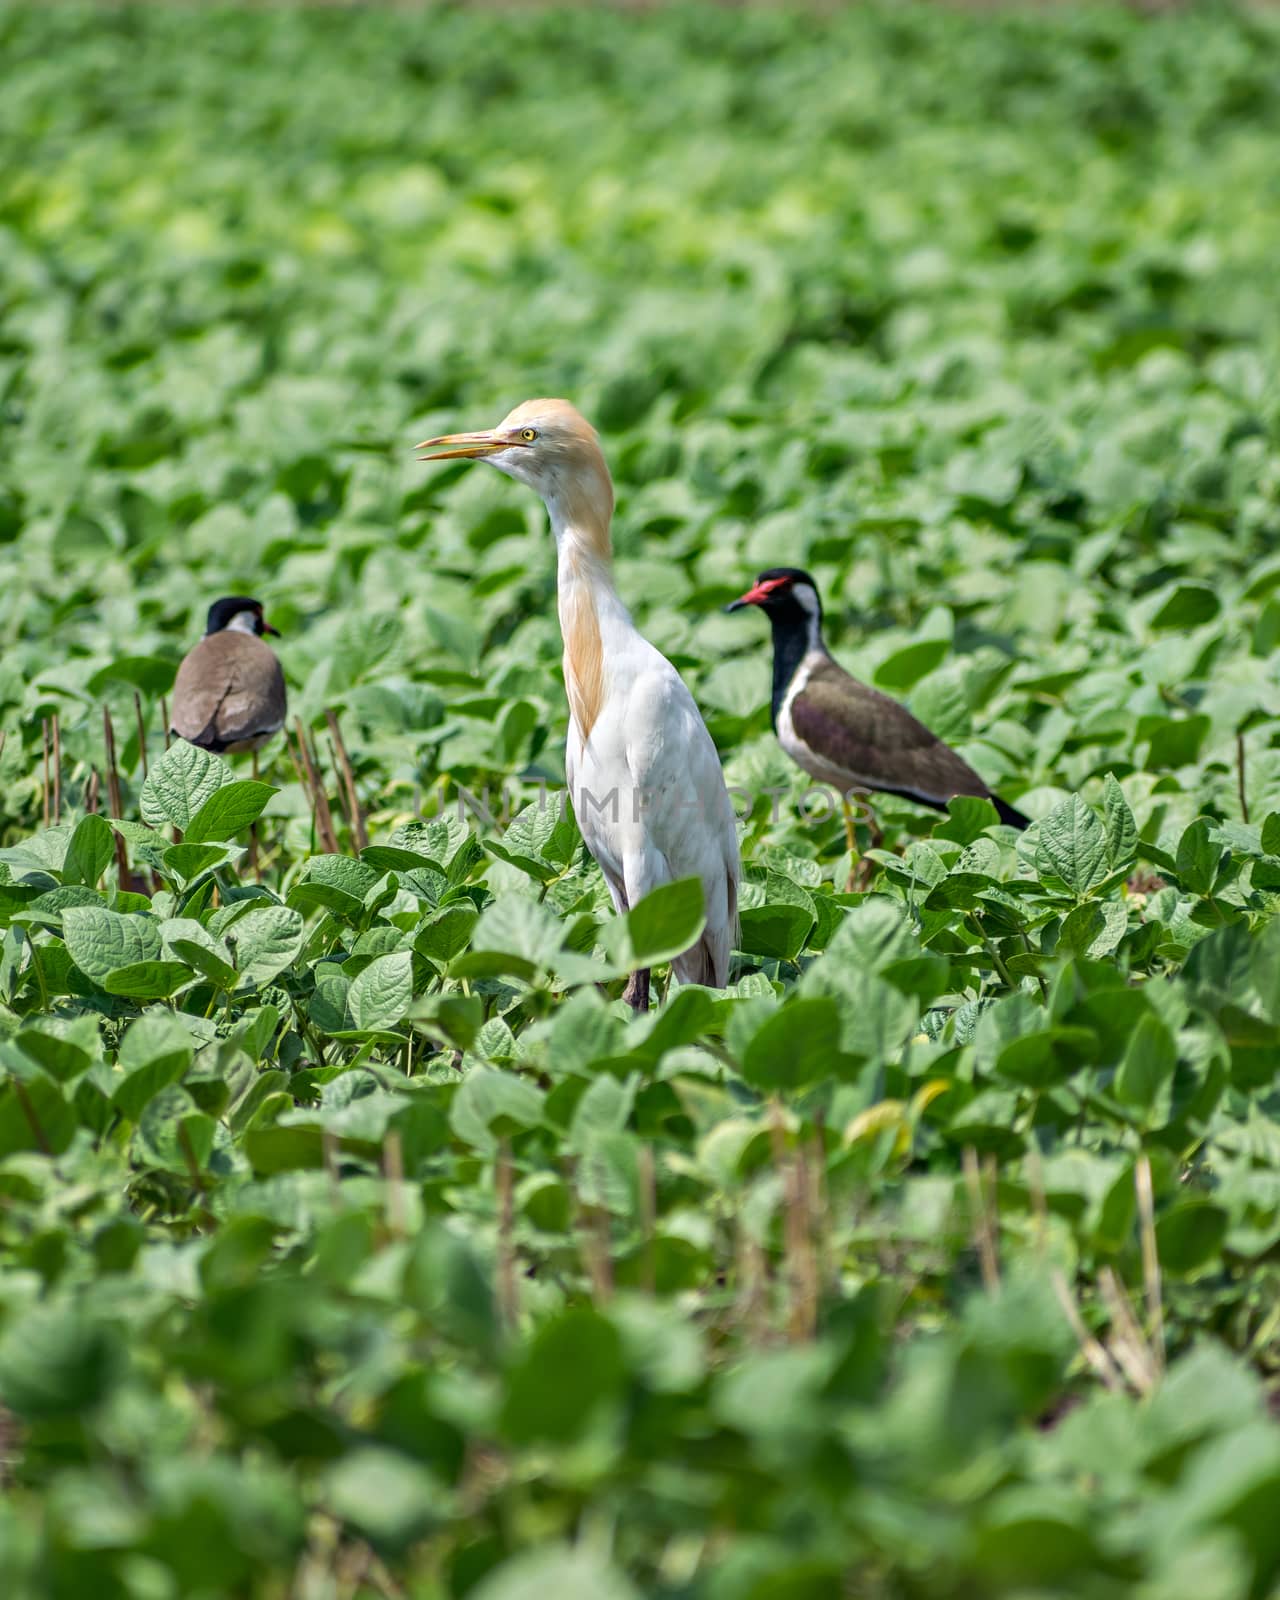 Close up image of Cattle Egret bird with Red Wattled Lapwing  in a field near Sasan Gir, Gujrat, India. by lalam